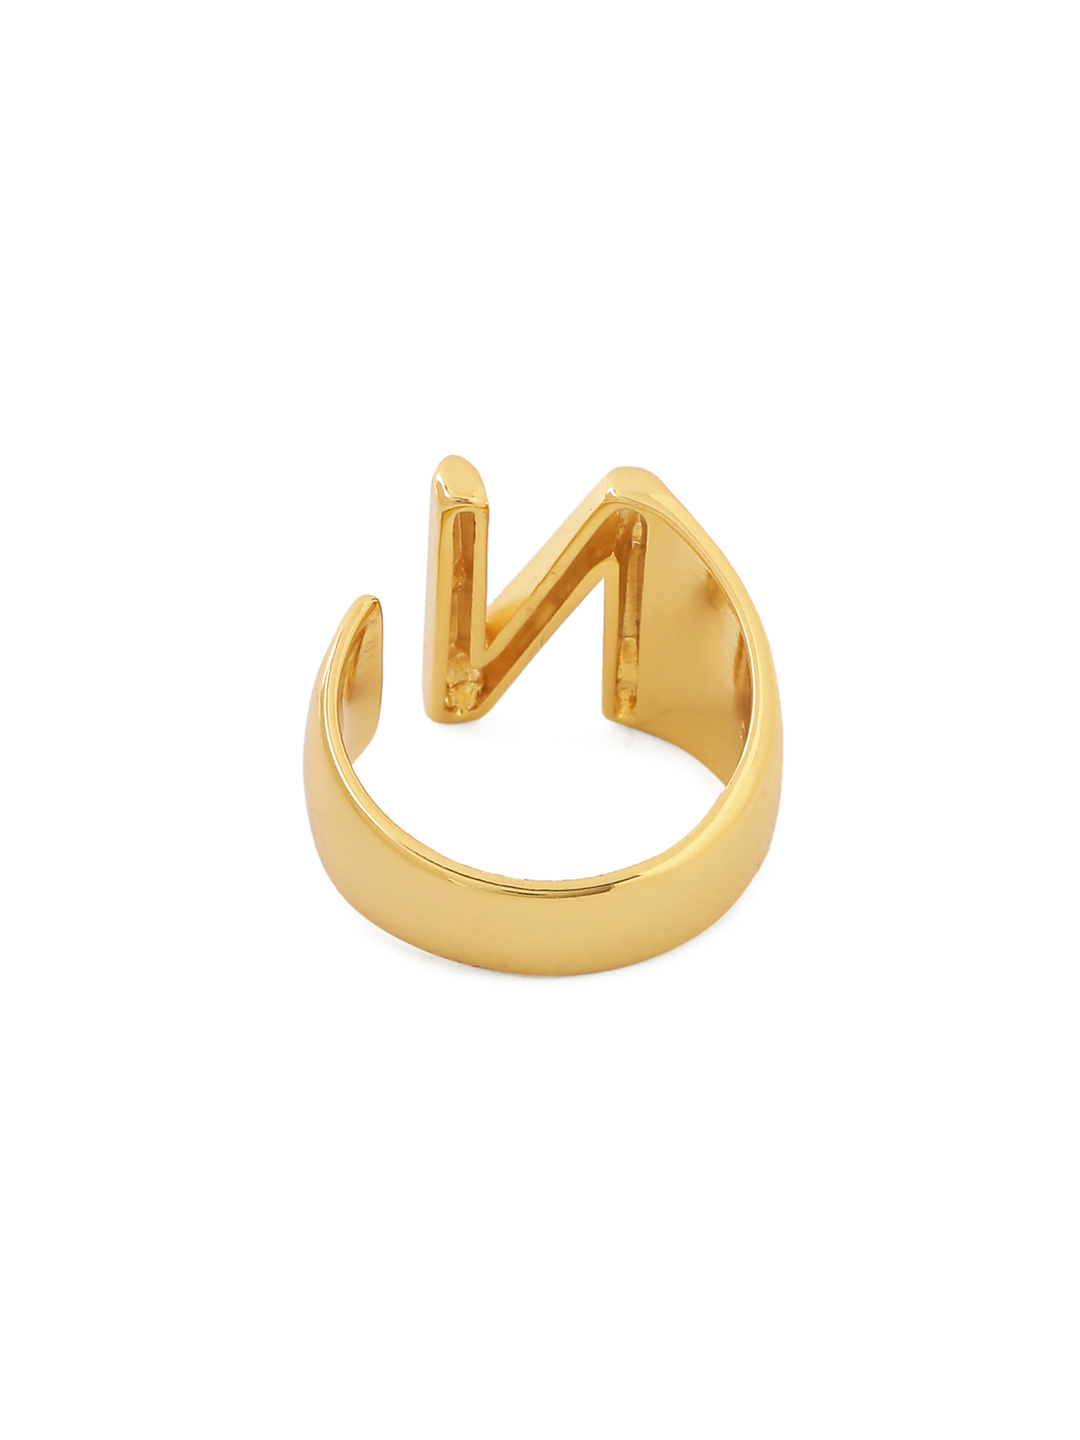 Buy Kanak Jewels Love Heart Initial Letter N Valentine for Girls stylish design  Gold plated ring at Amazon.in